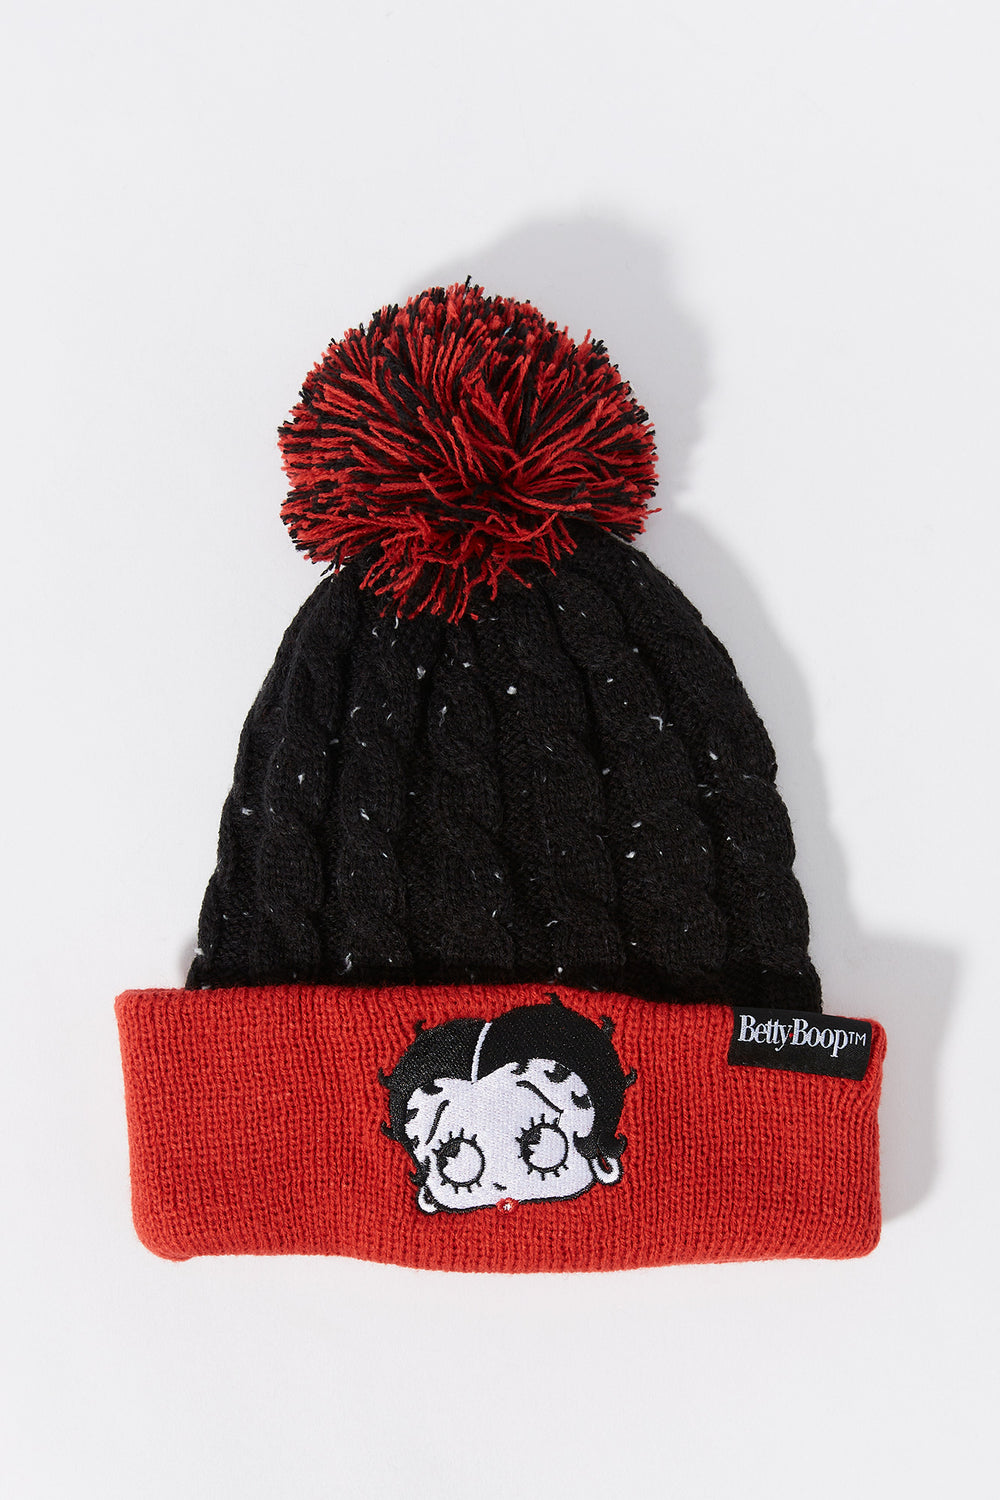 Betty Boop Embroidered Beanie Betty Boop Embroidered Beanie 1